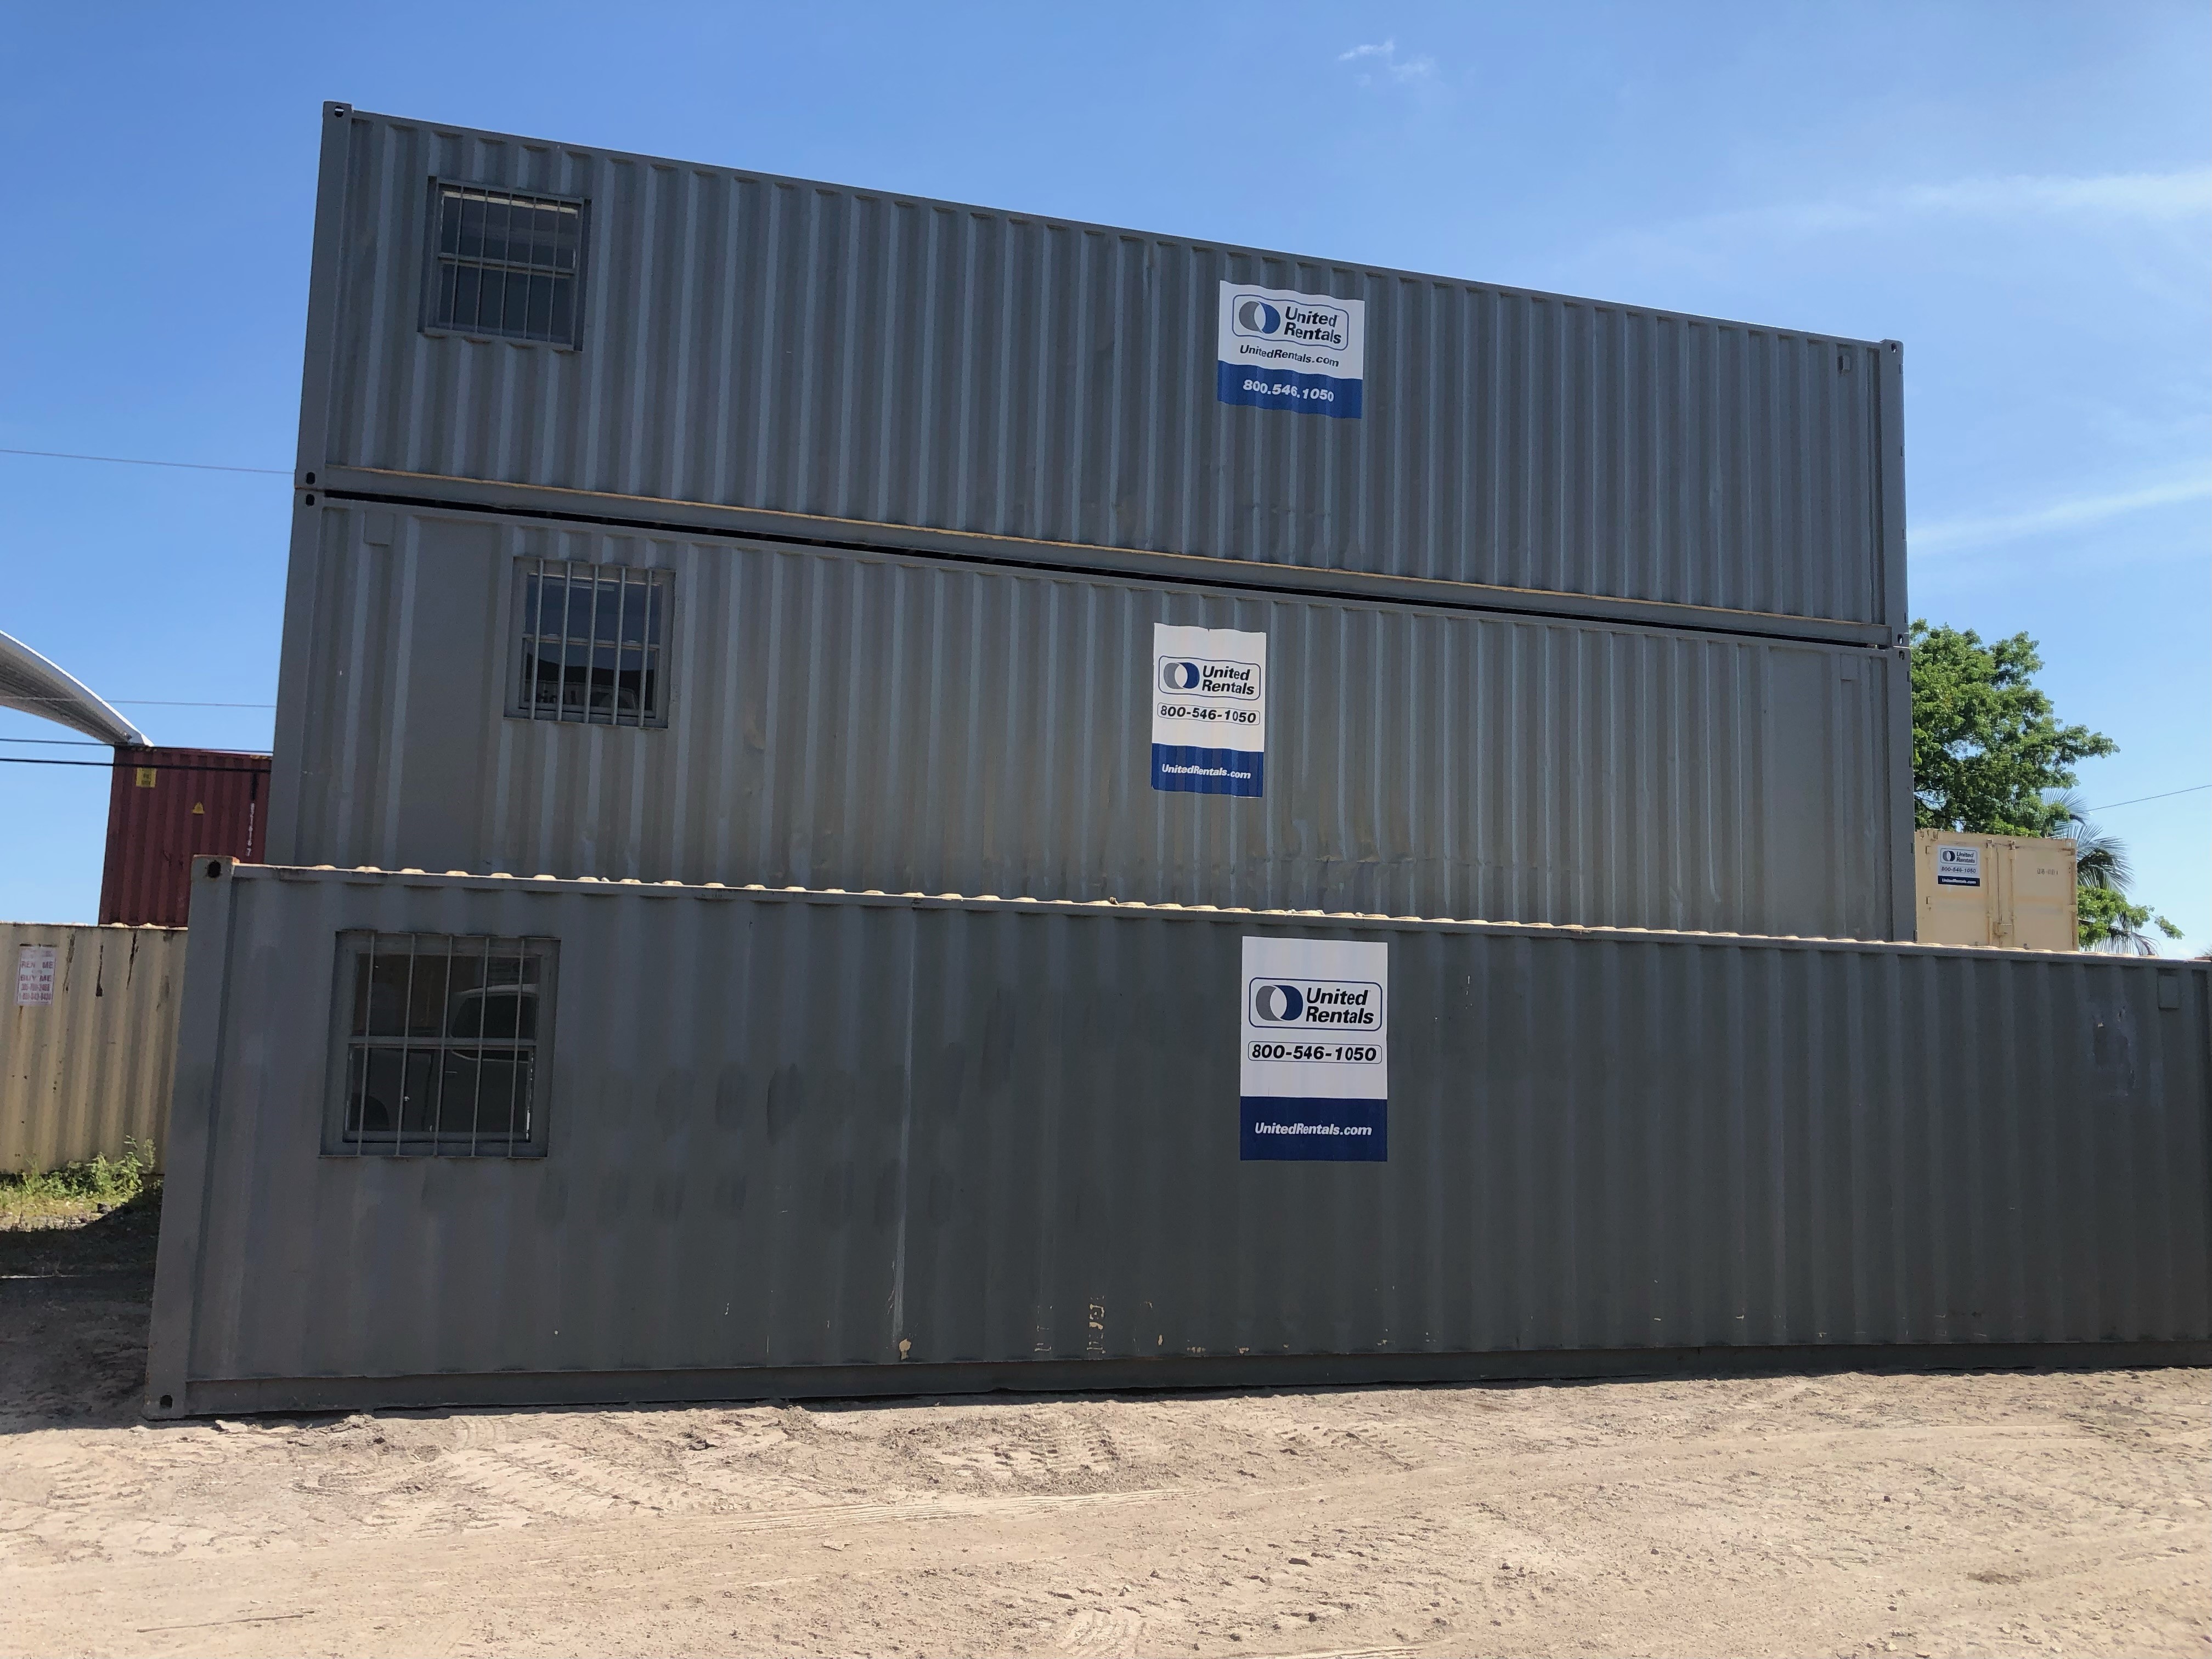 Image 3 | United Rentals - Storage Containers and Mobile Offices